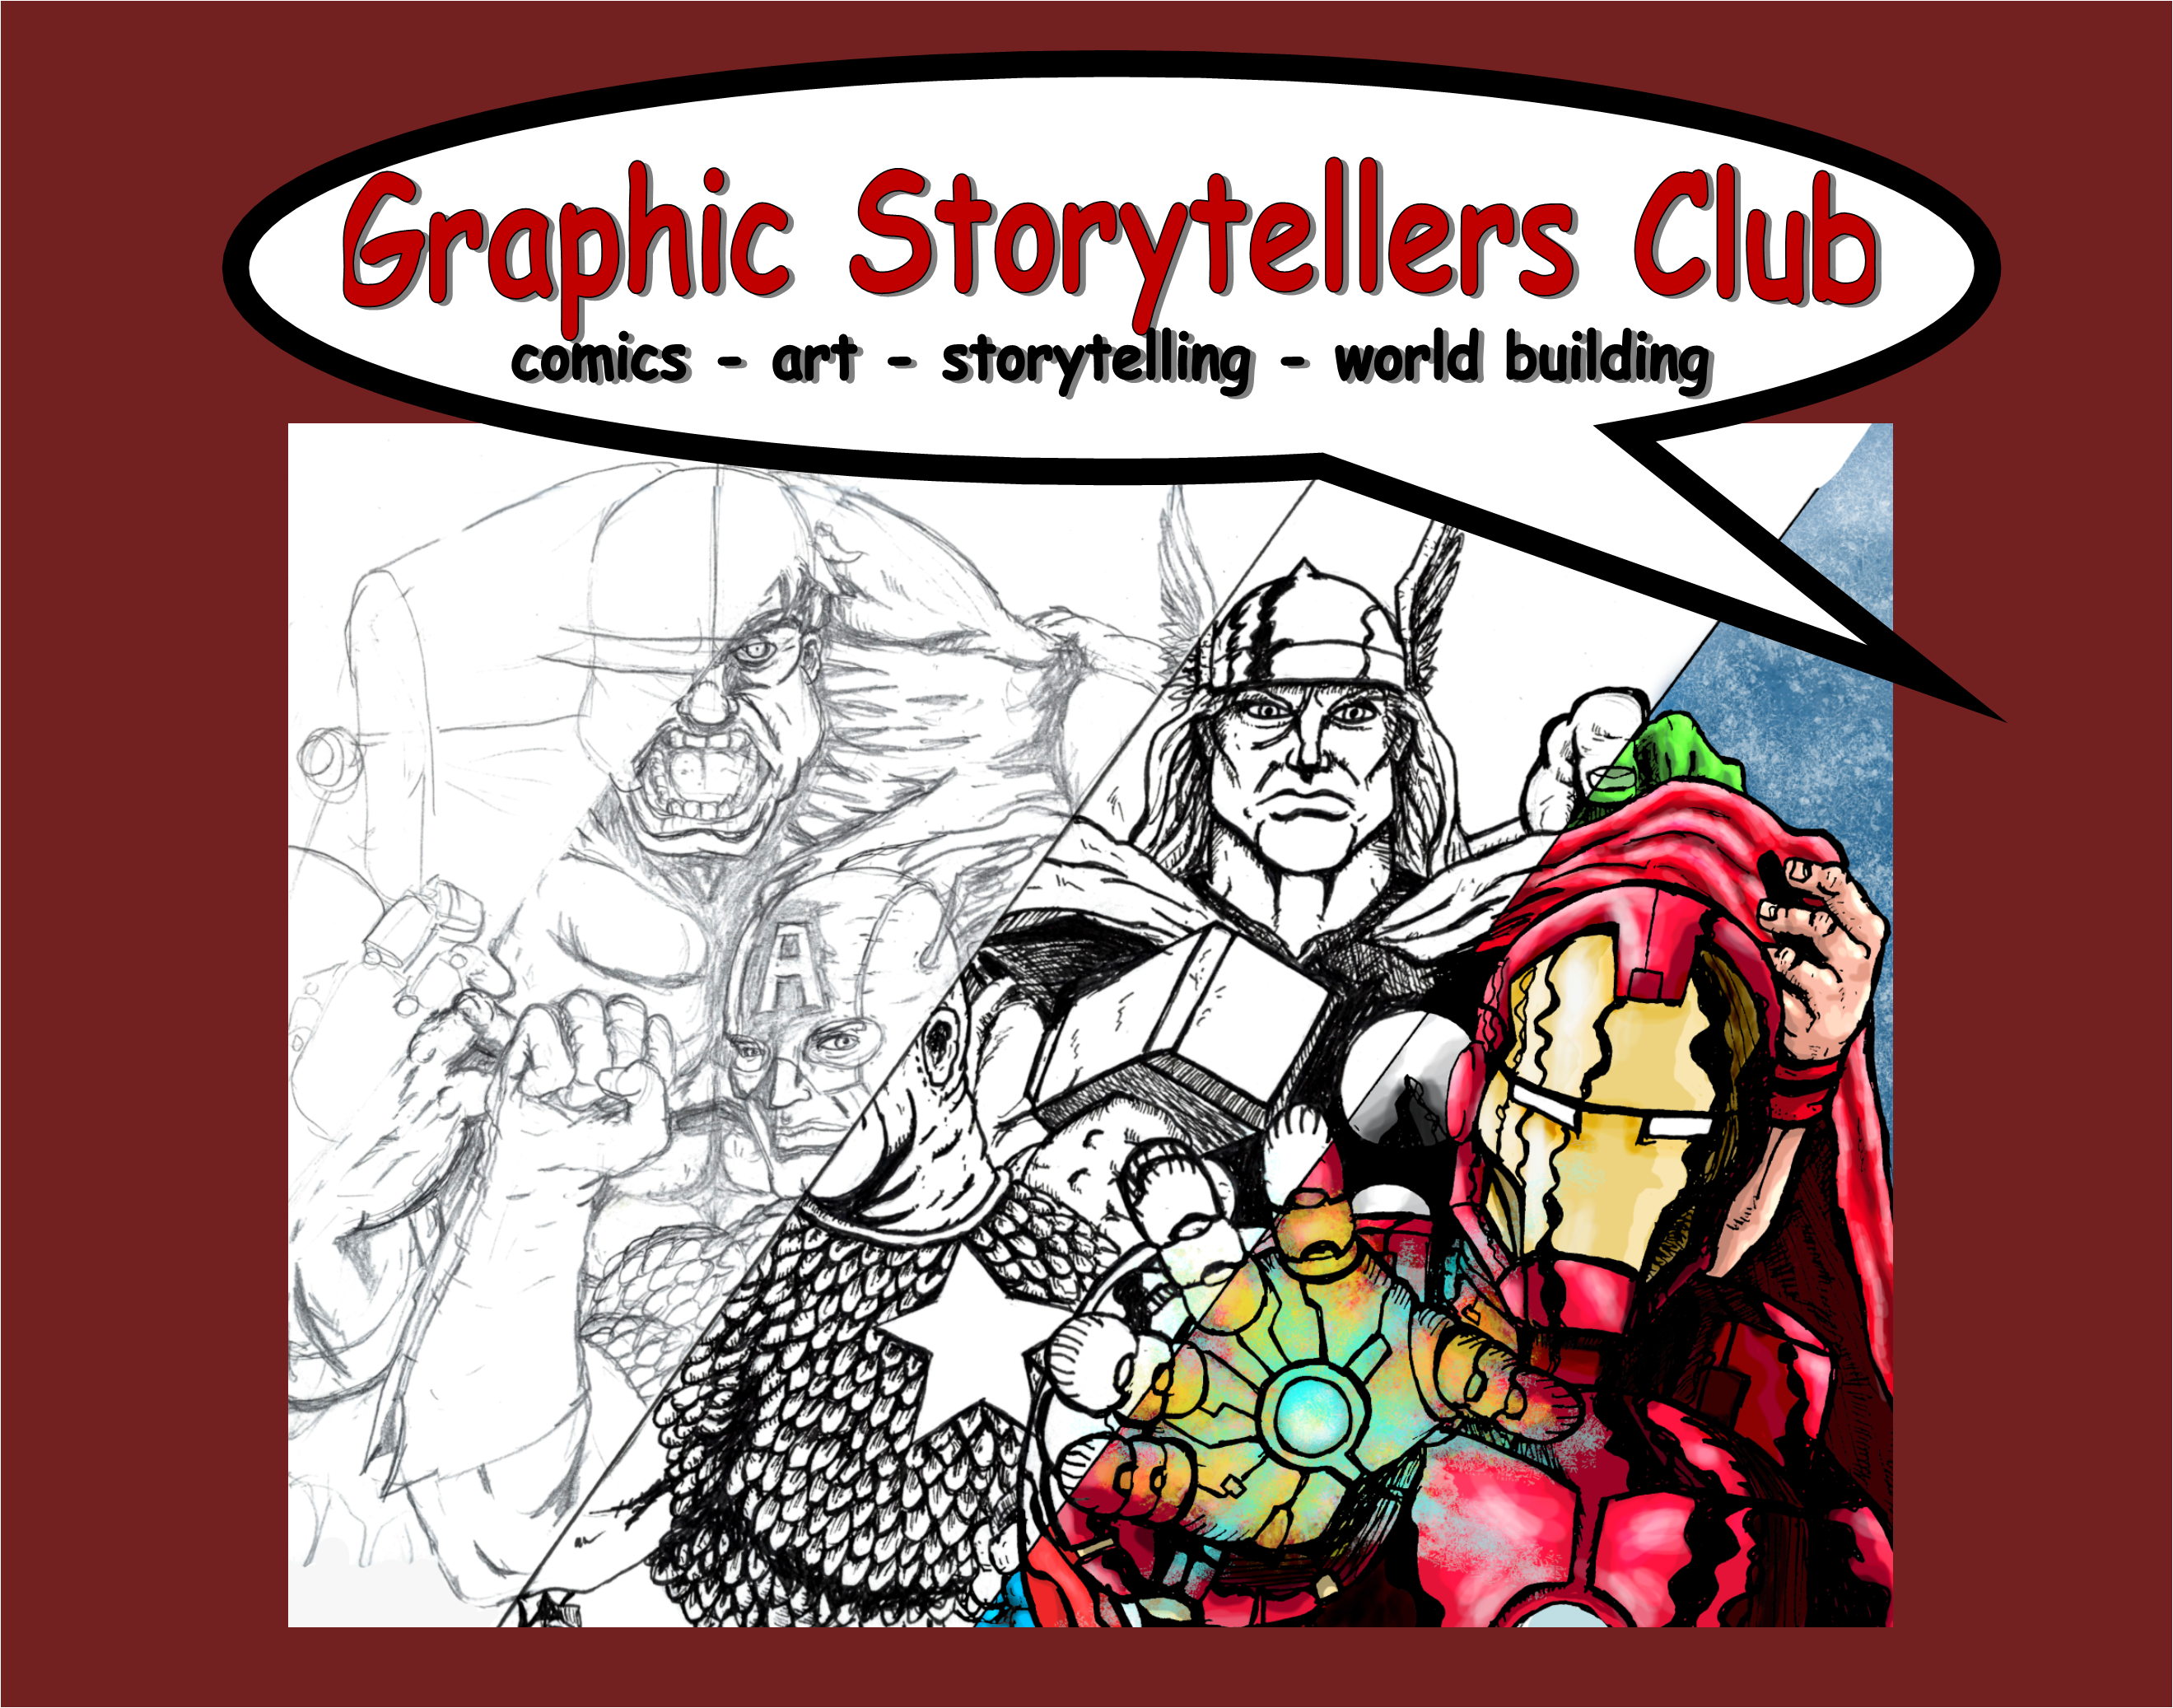 Image contains text that reads: Graphic Storytellers Club: Comics - Art - Storytelling - World building, image also contains drawings of comic book characters